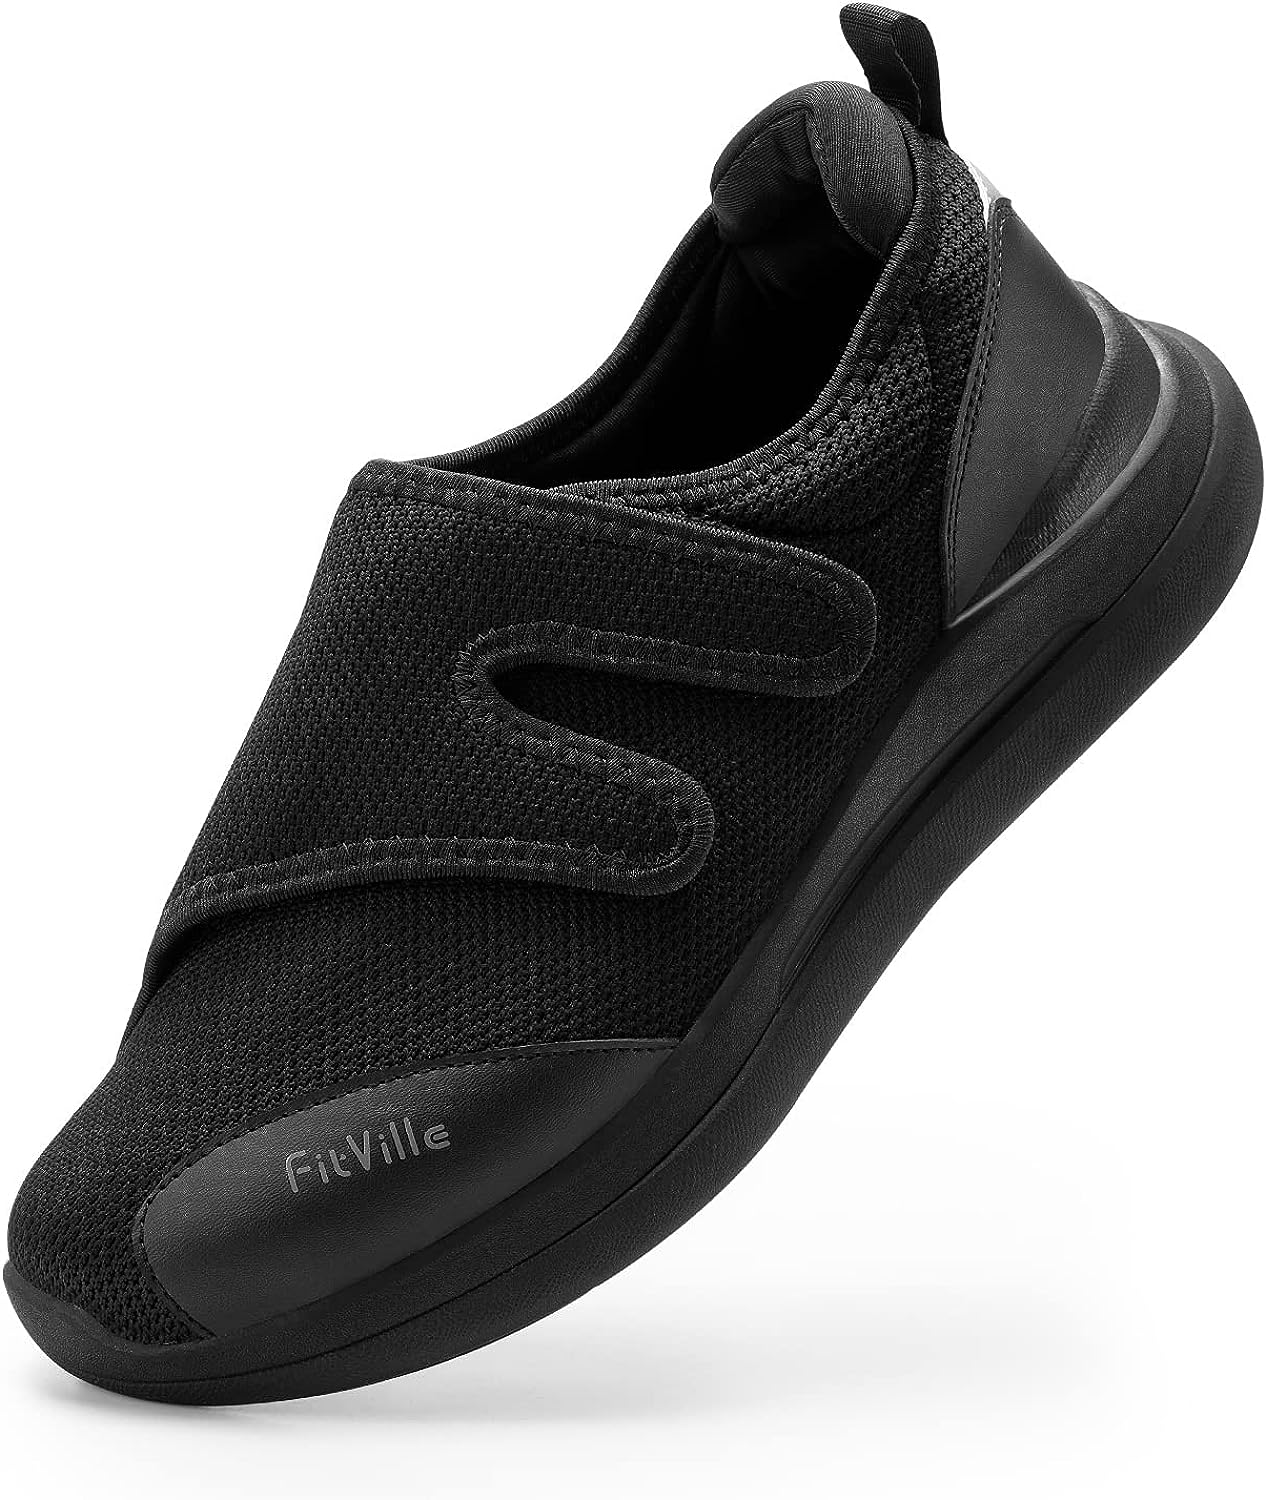 FitVille Diabetic Shoes for Men Extra Wide Width [...]